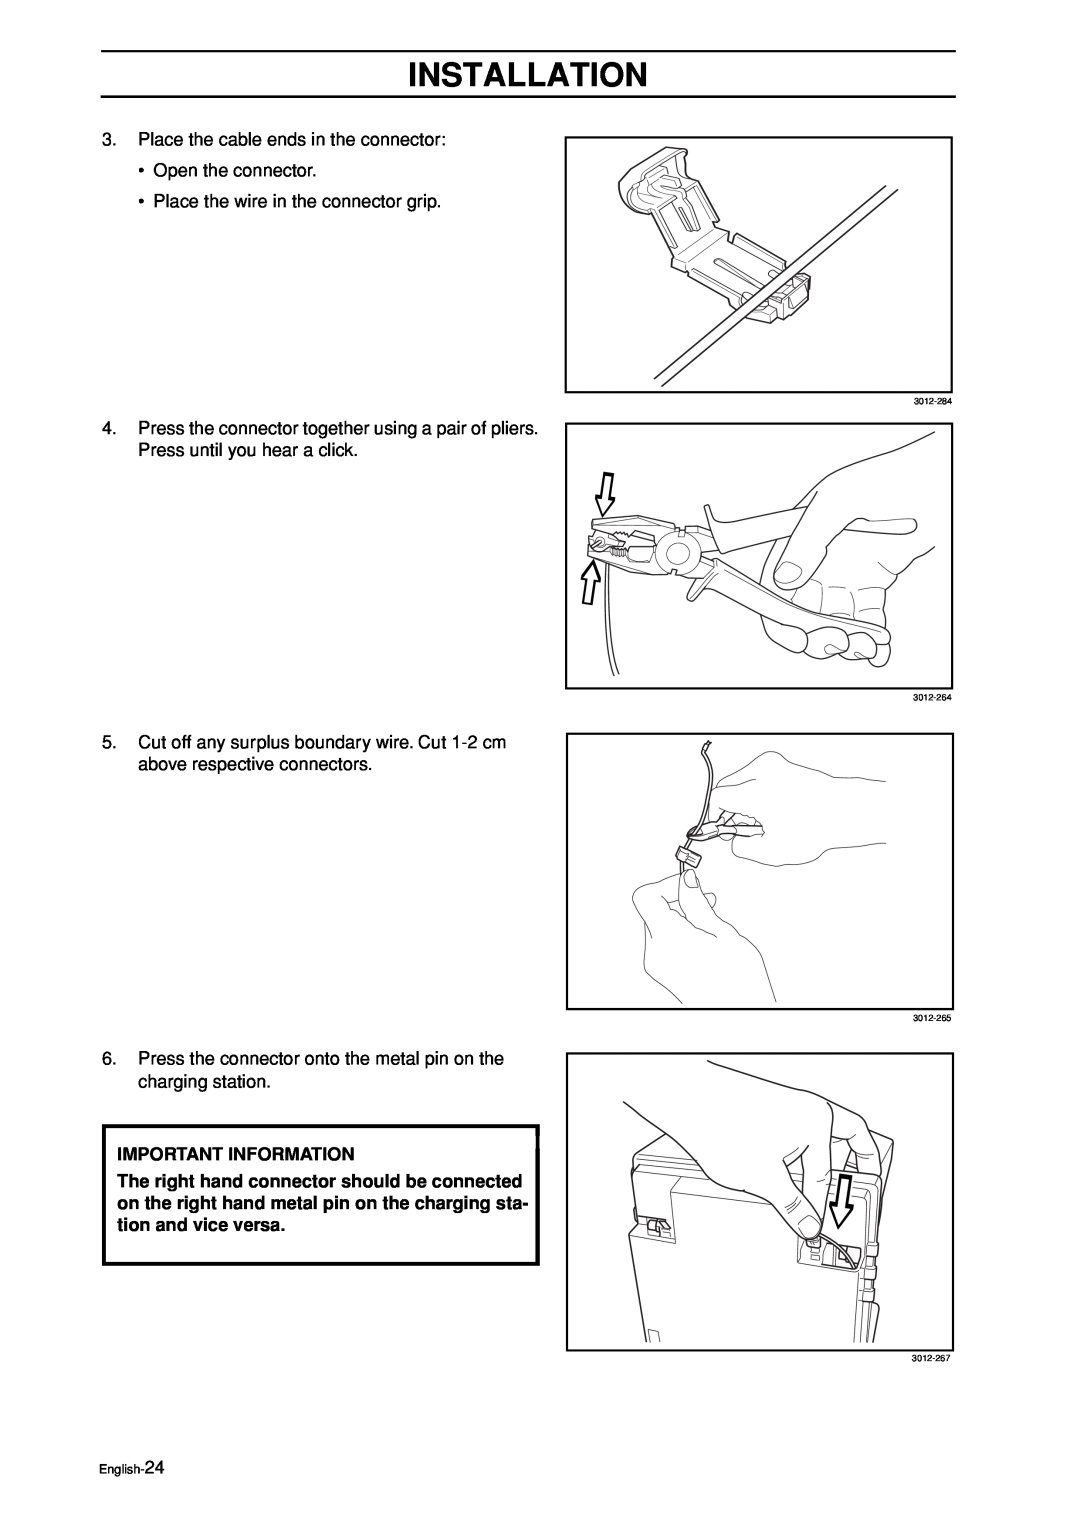 Husqvarna Auto Mower manual Installation, Place the cable ends in the connector Open the connector, Important Information 